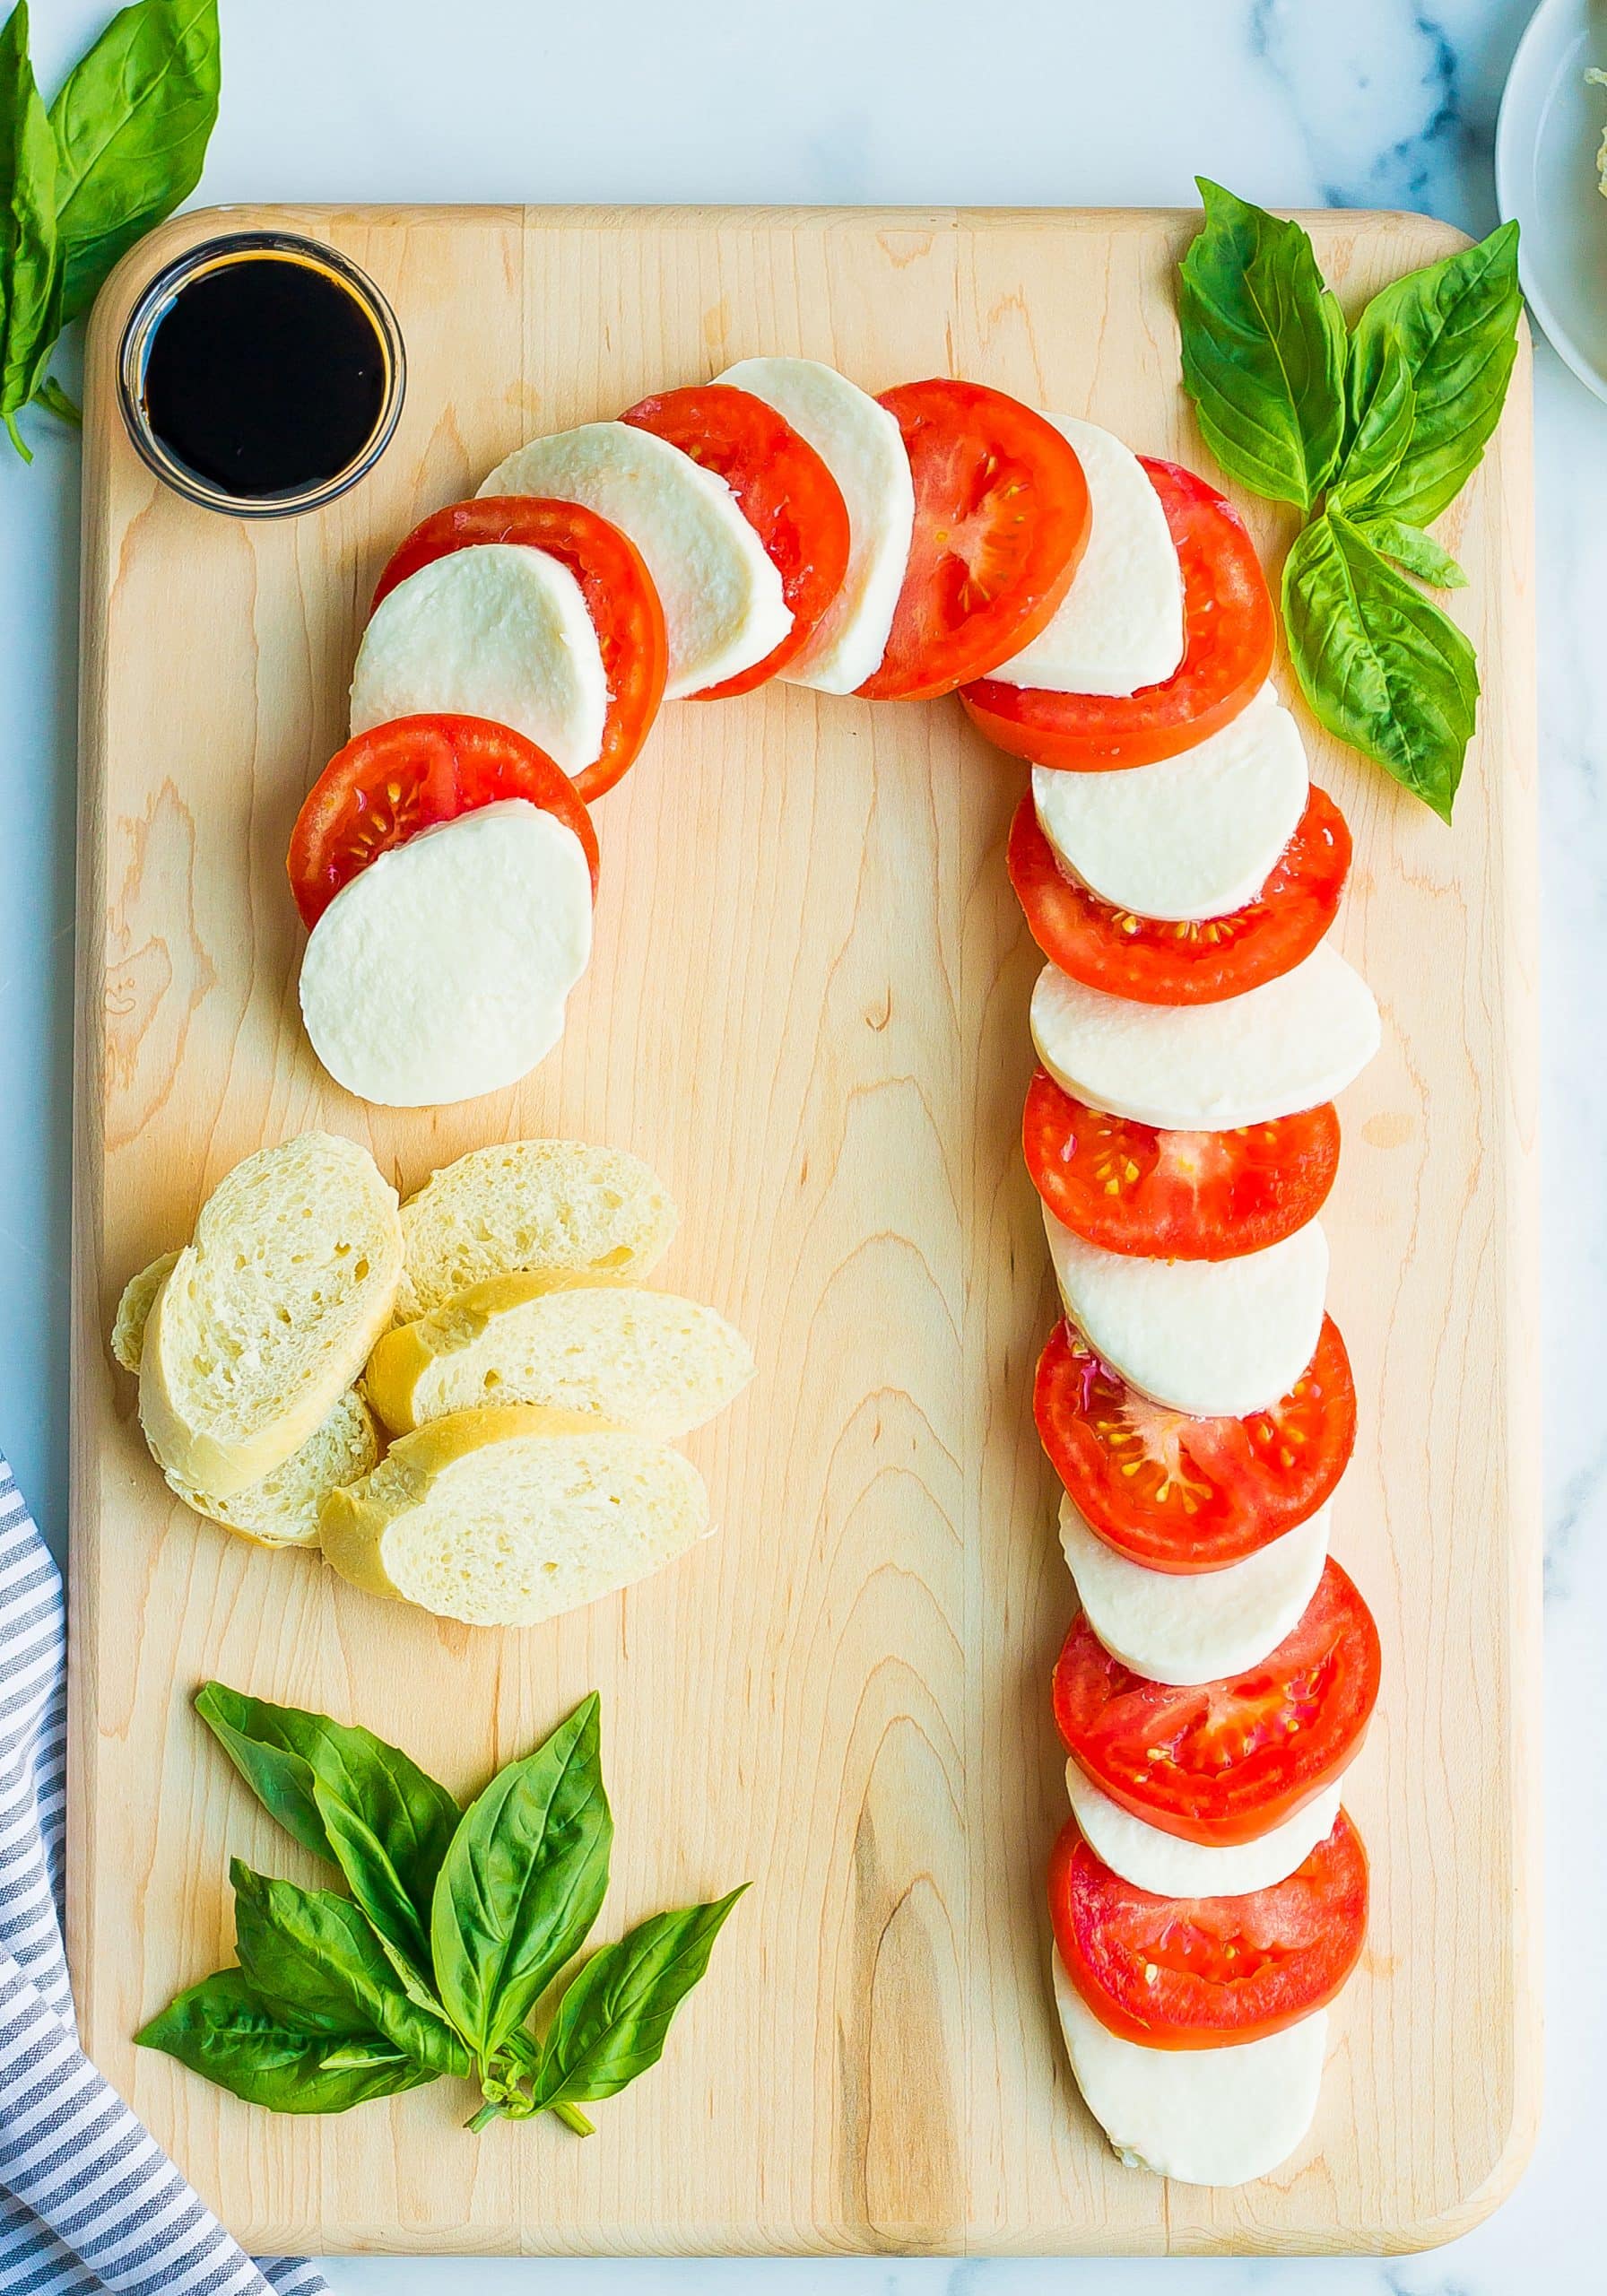 sliced tomato and mozzarella on wooden cutting board with basil and bread